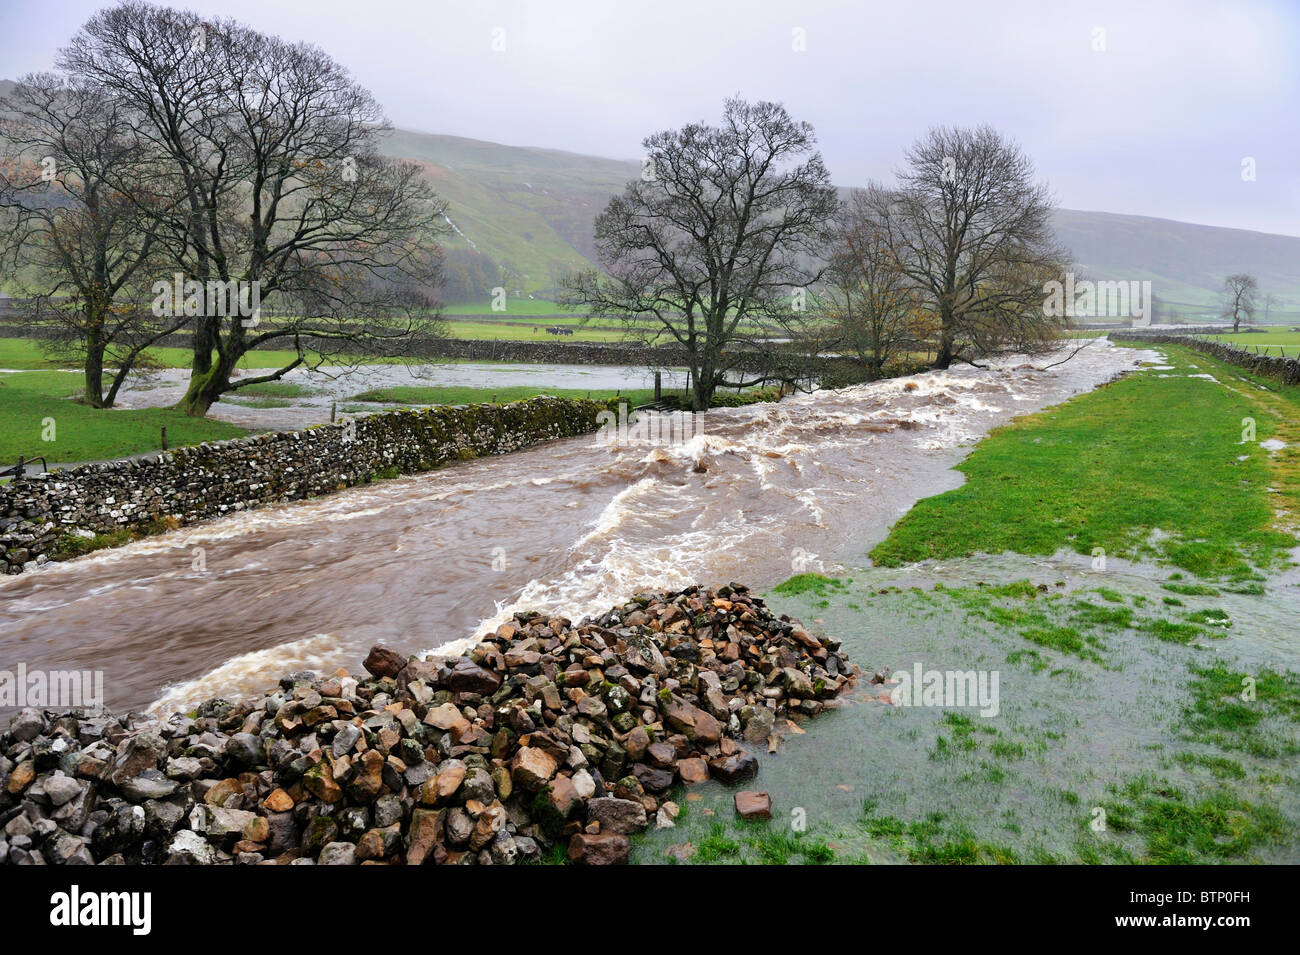 The flooding River Skirfare, Halton Gill, Littondale Yorkshire Dales National Park, England, on a wet November day. Stock Photo